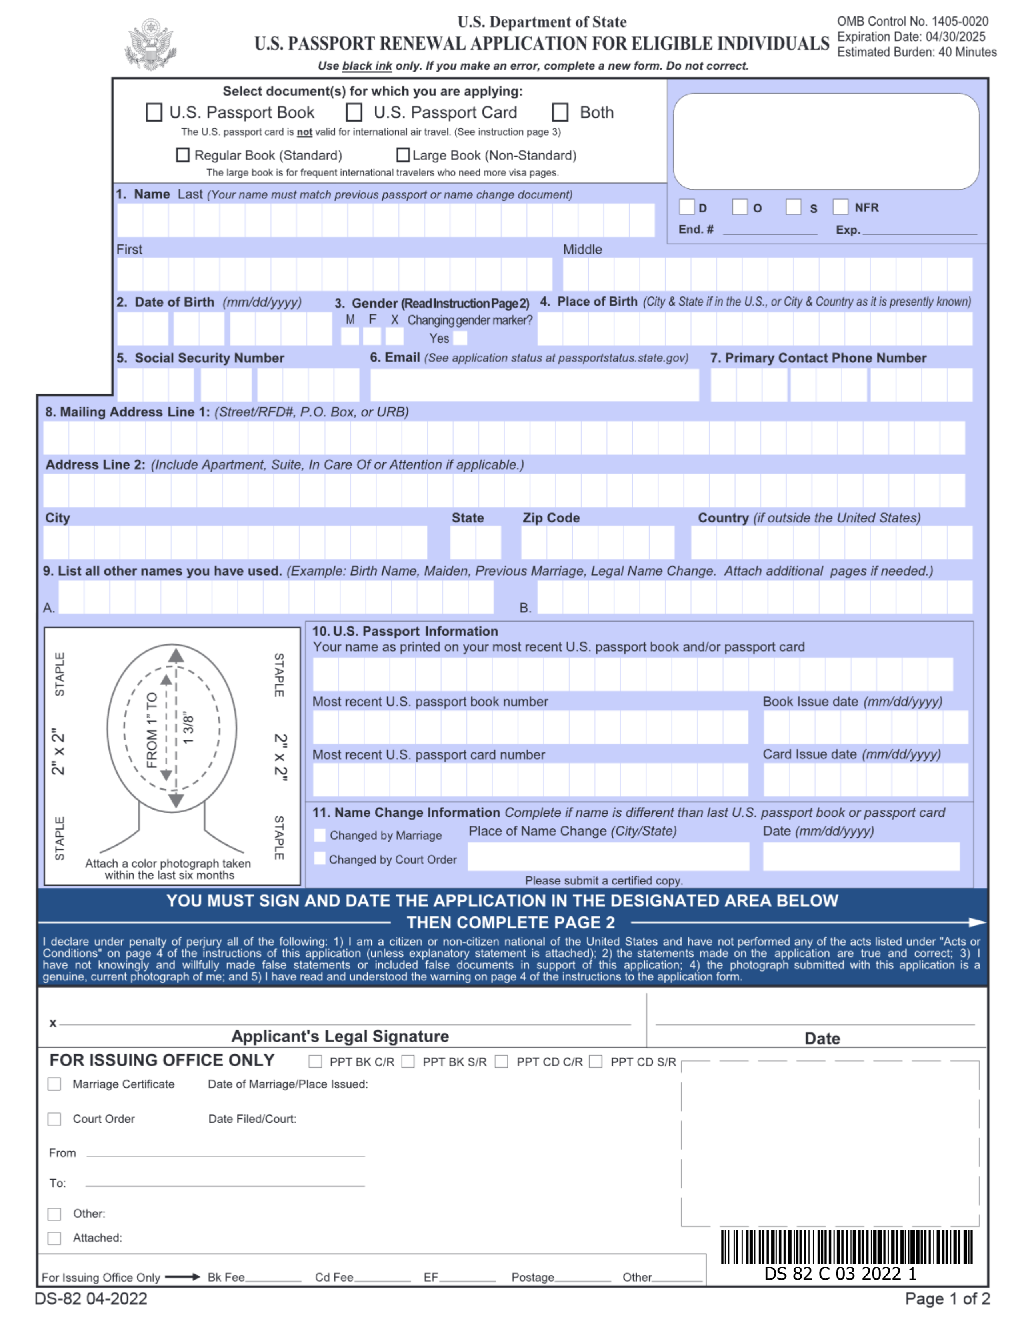 Renewal Application For A US Passport DS 82 